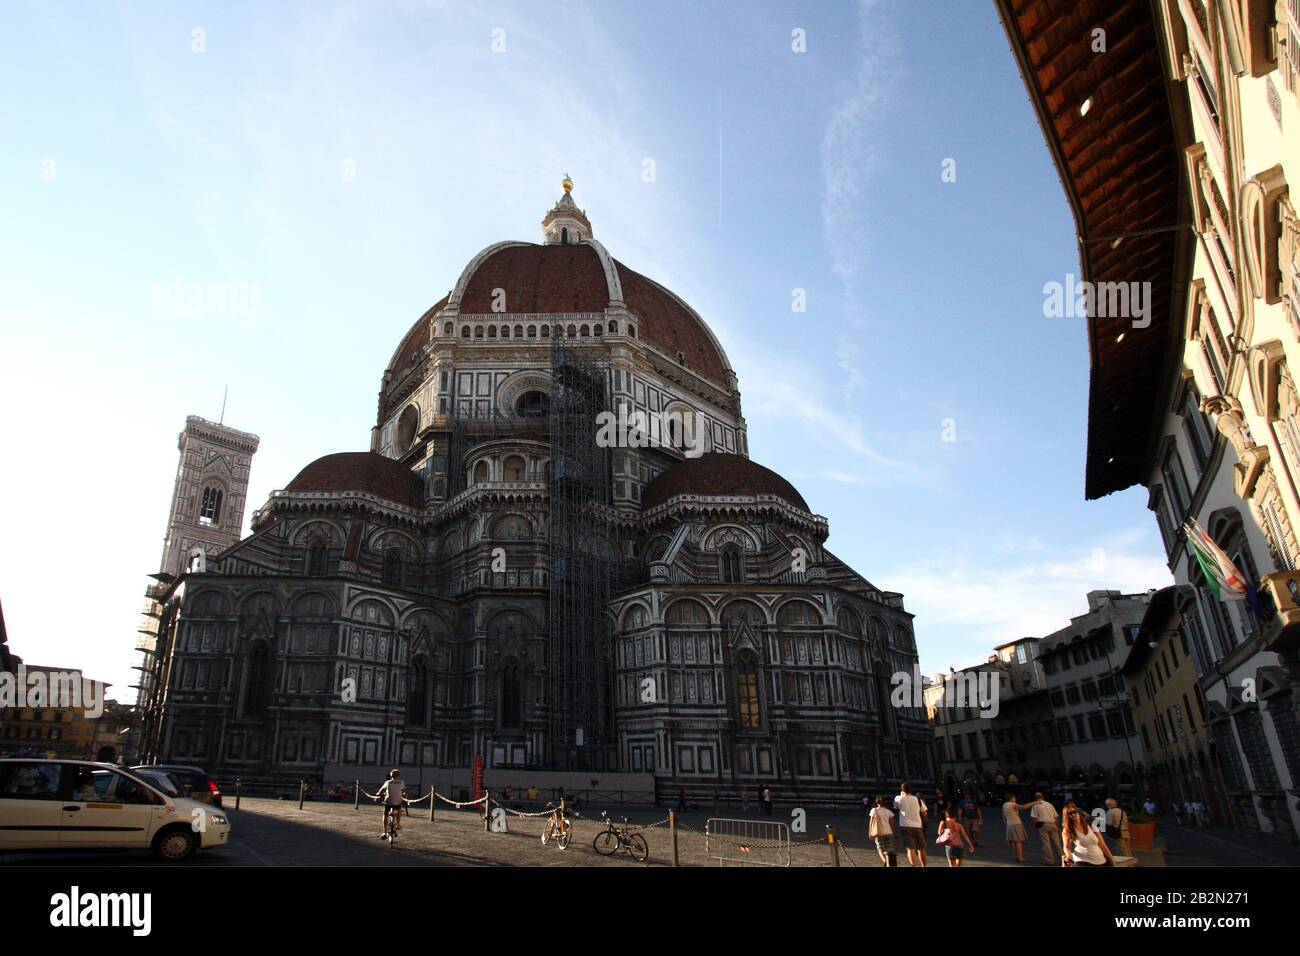 Florence, Italy - September 11, 2011: The Cathedral of Santa Maria del Fiore Stock Photo